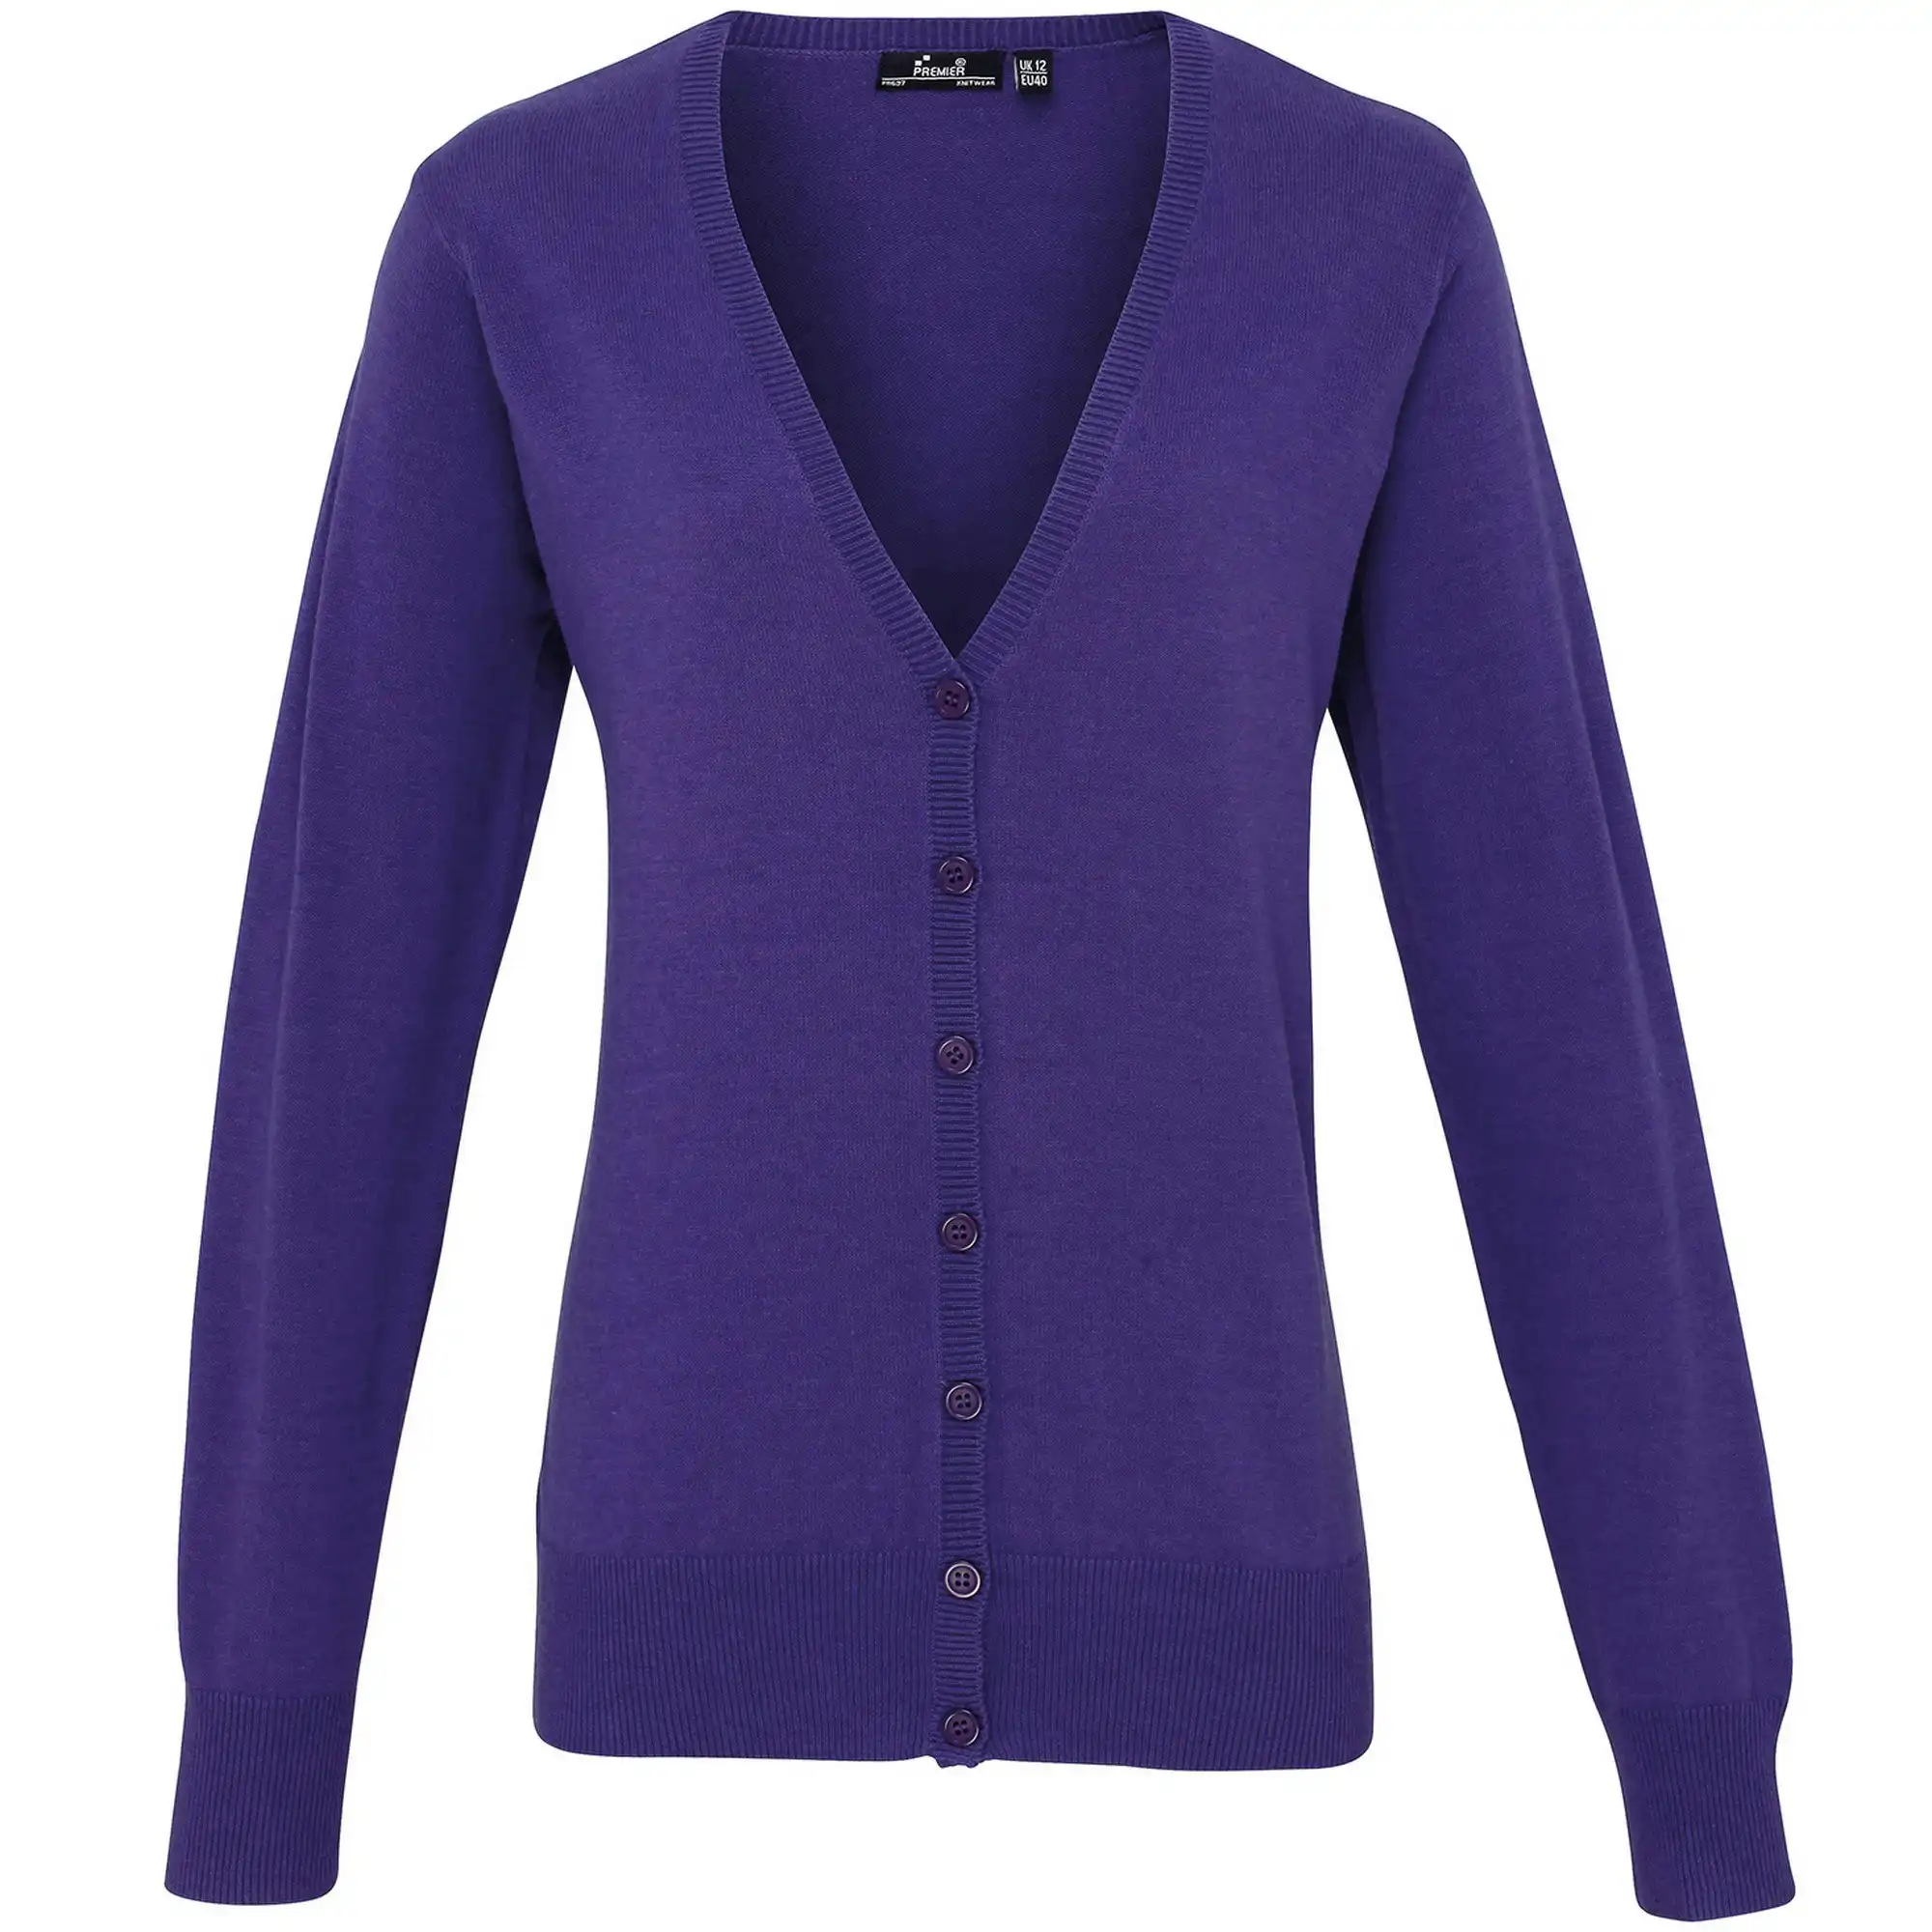 Premier Womens/Ladies Button Through Long Sleeve V-neck Knitted Cardigan